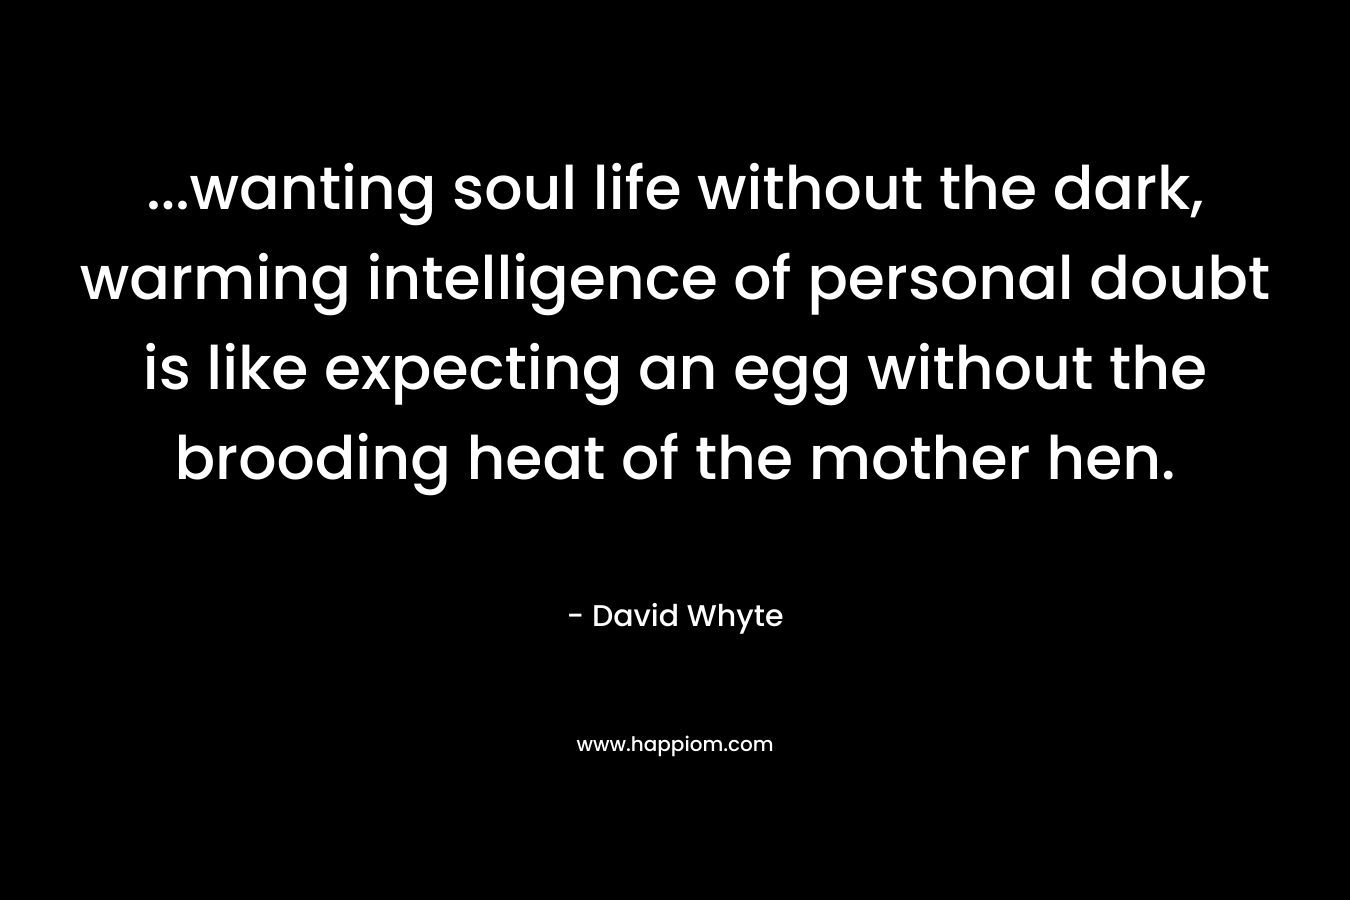 …wanting soul life without the dark, warming intelligence of personal doubt is like expecting an egg without the brooding heat of the mother hen. – David Whyte